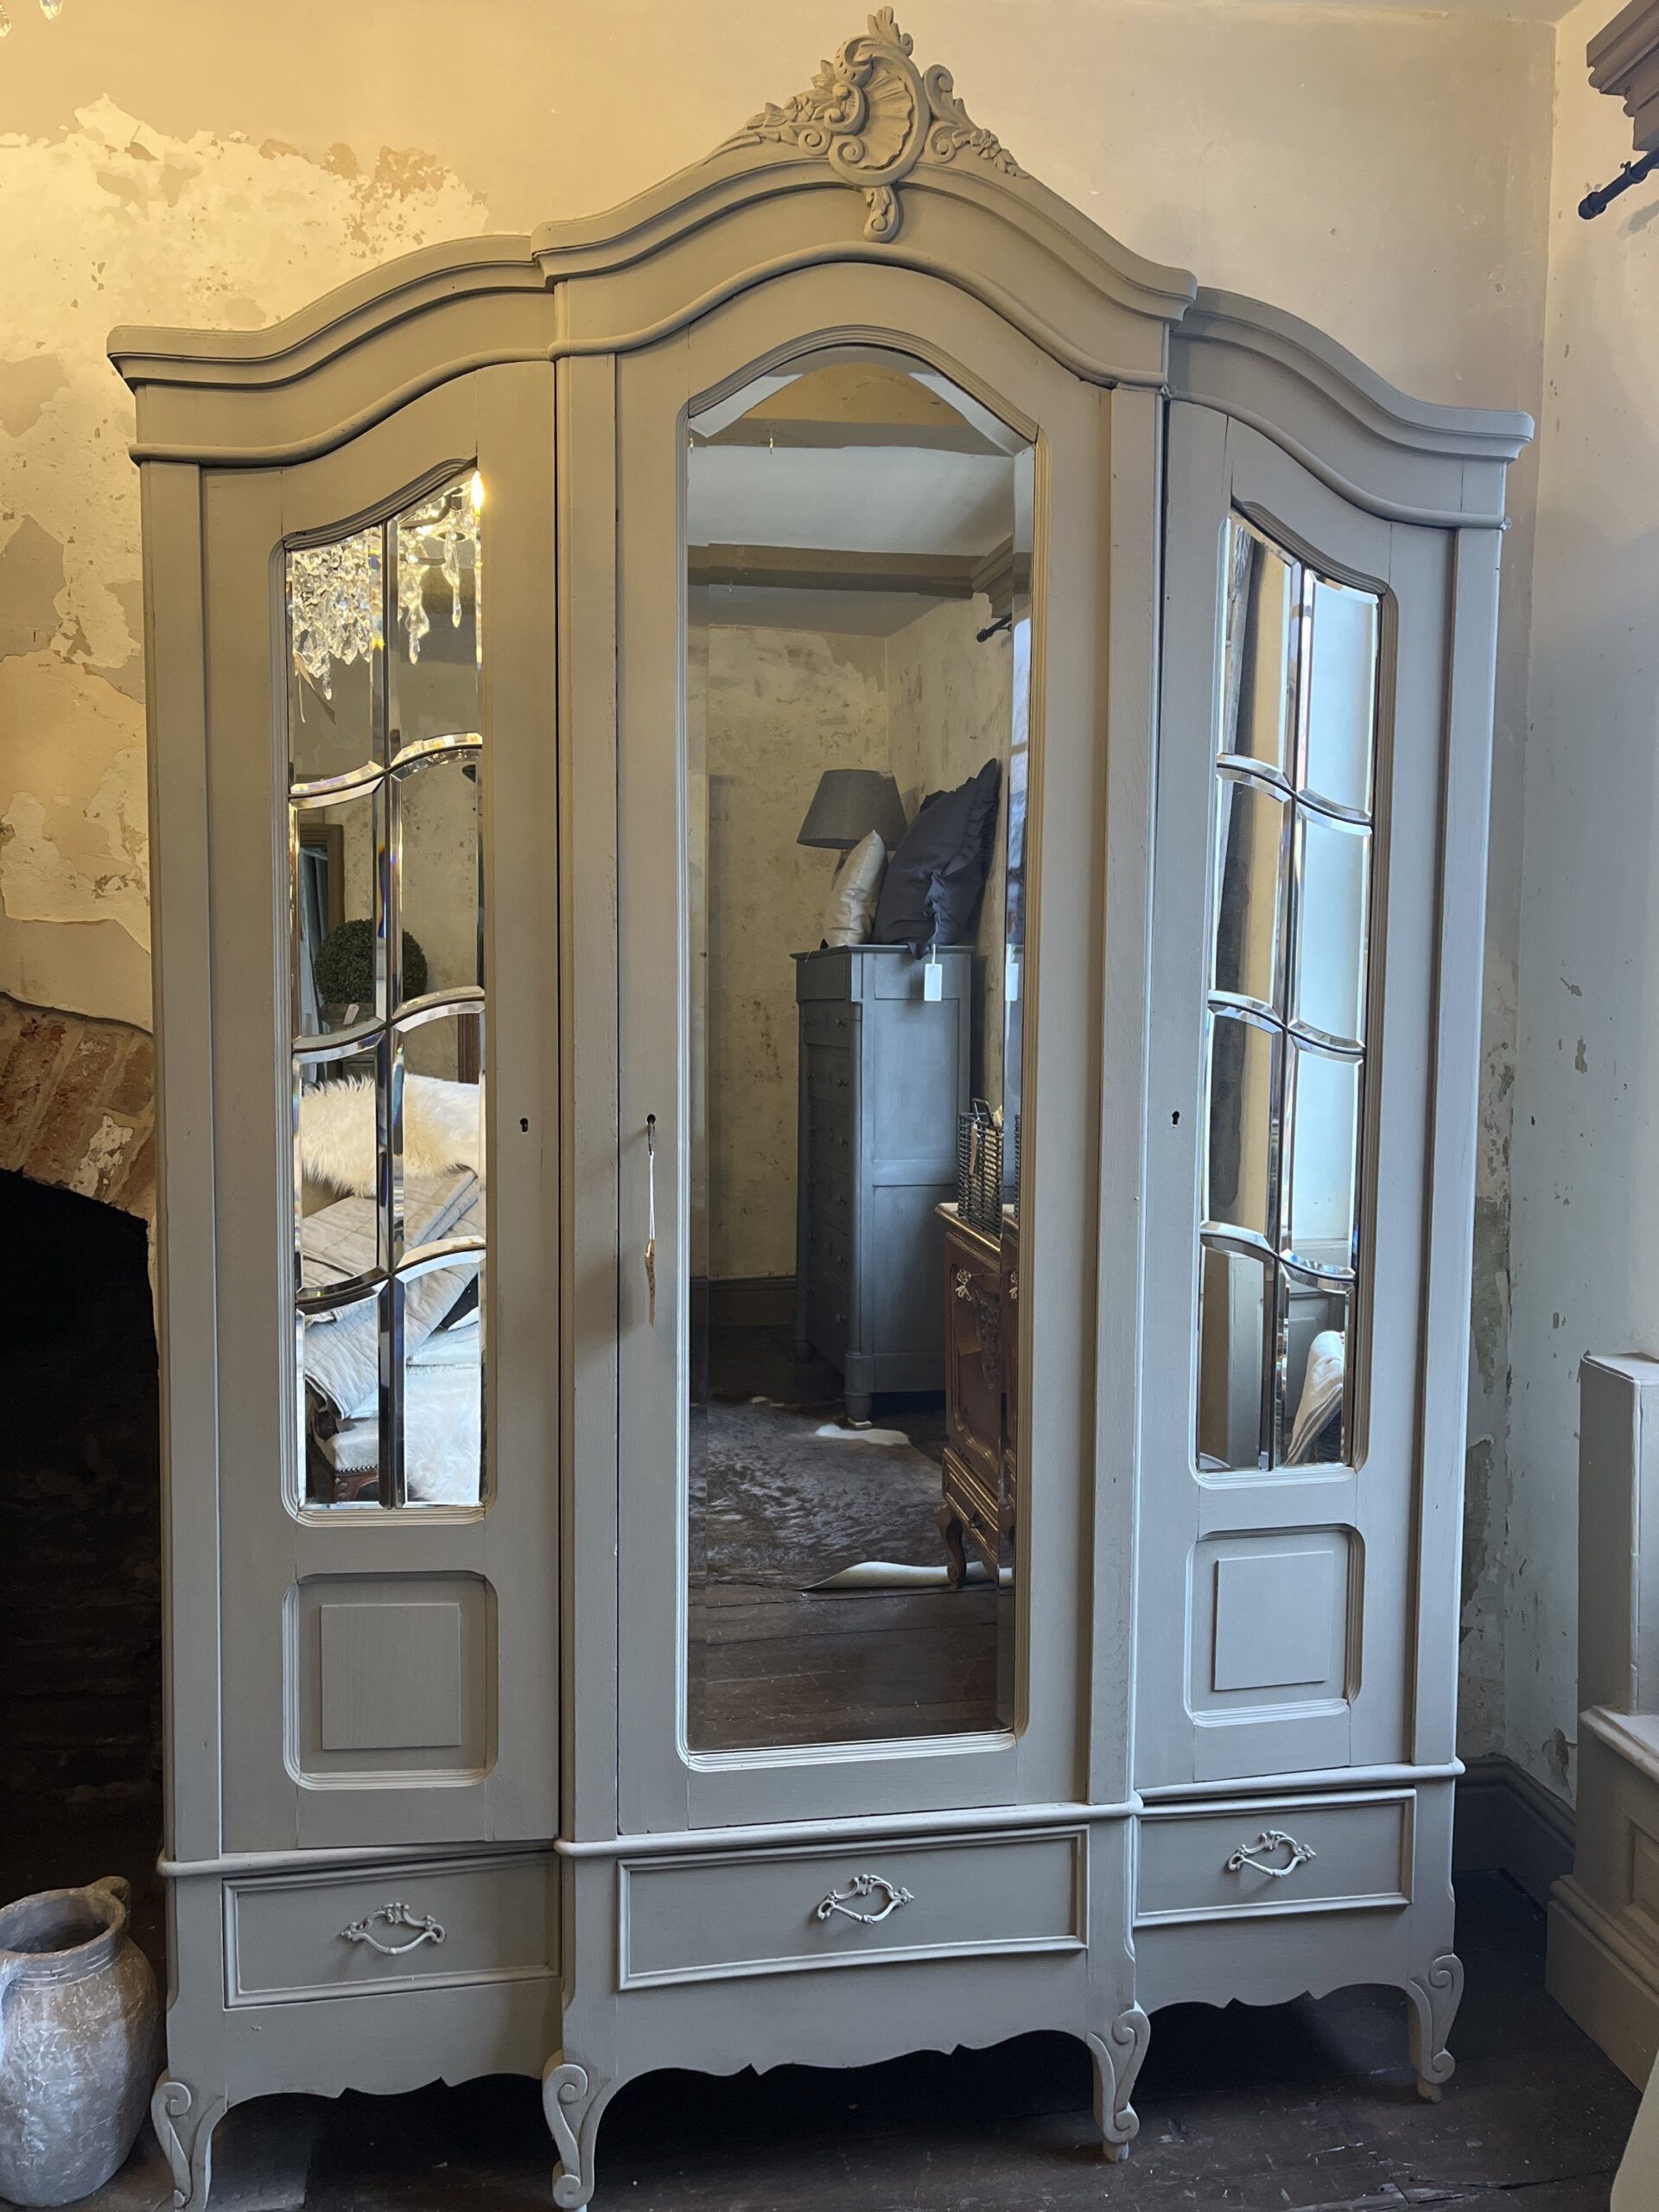 Armoires – Wardrobes – Vitrines | Village Chic Throughout Vintage French Wardrobes (View 14 of 15)